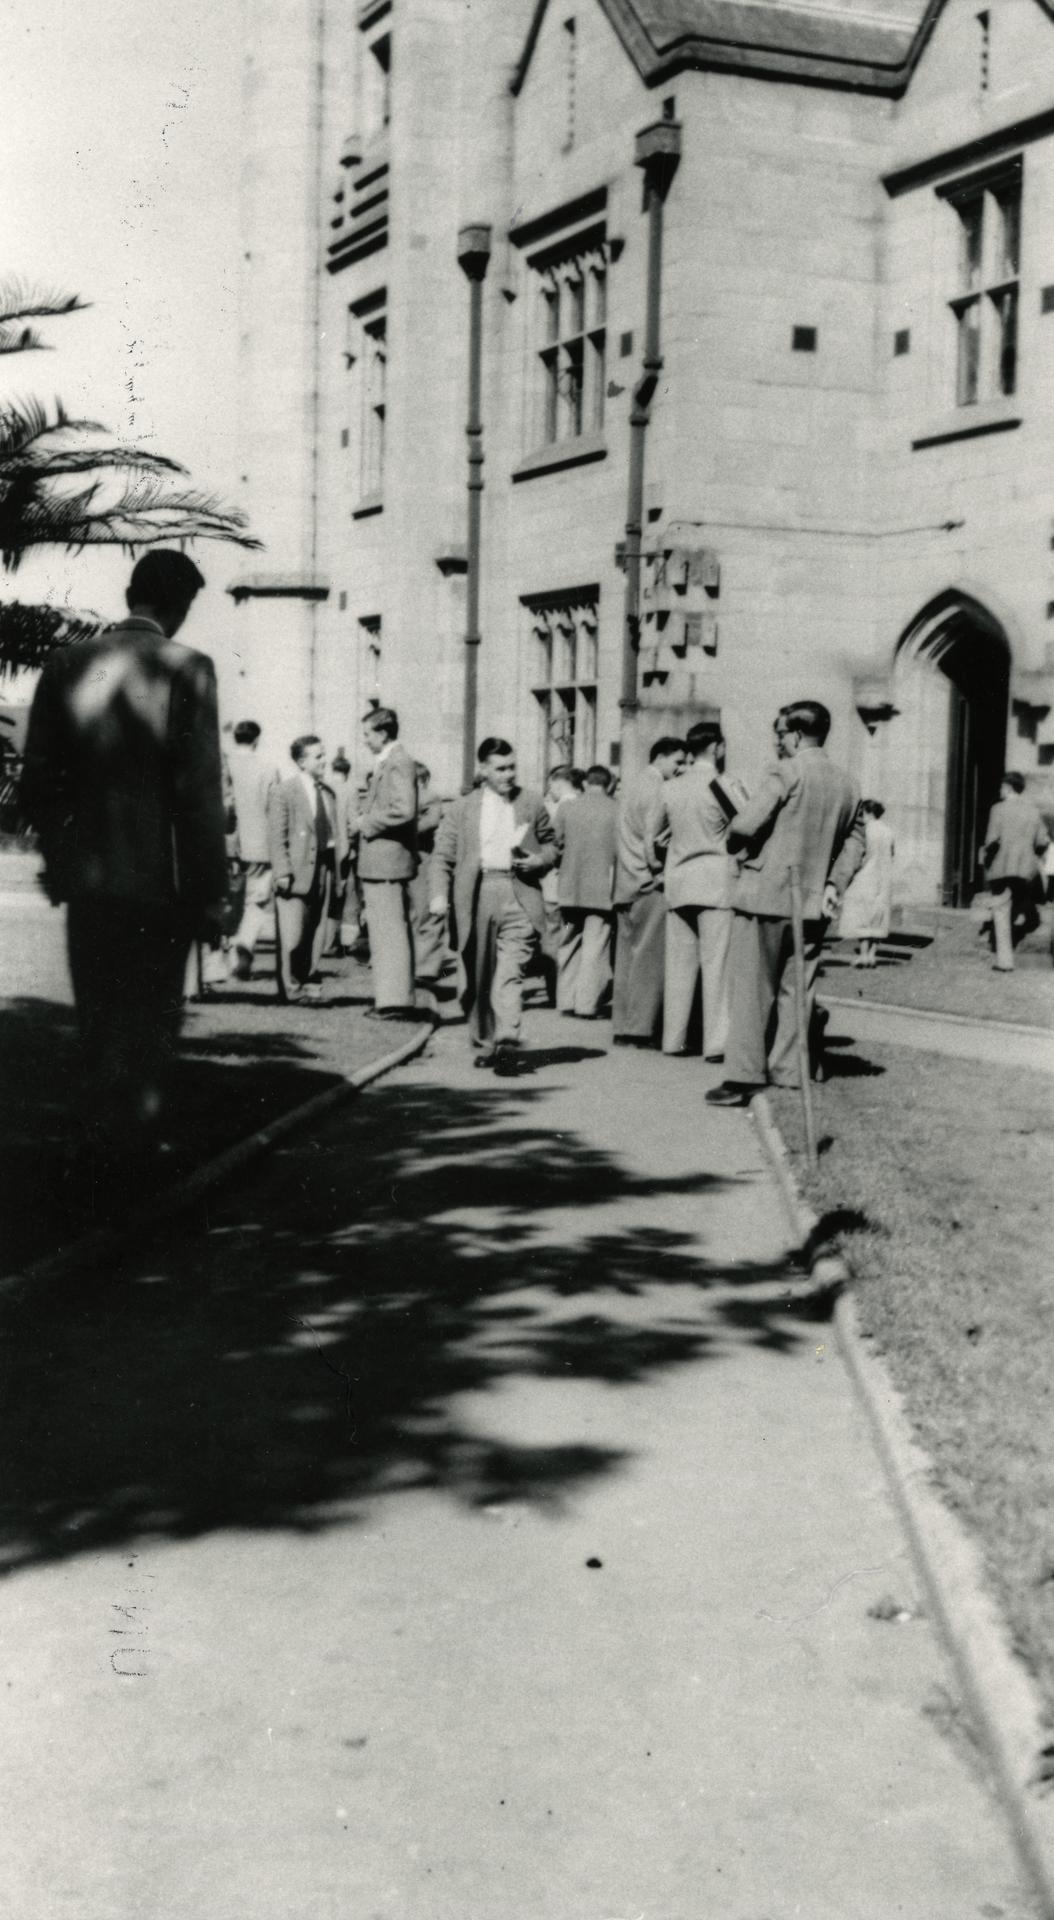 Students outside Old Arts building, 1954